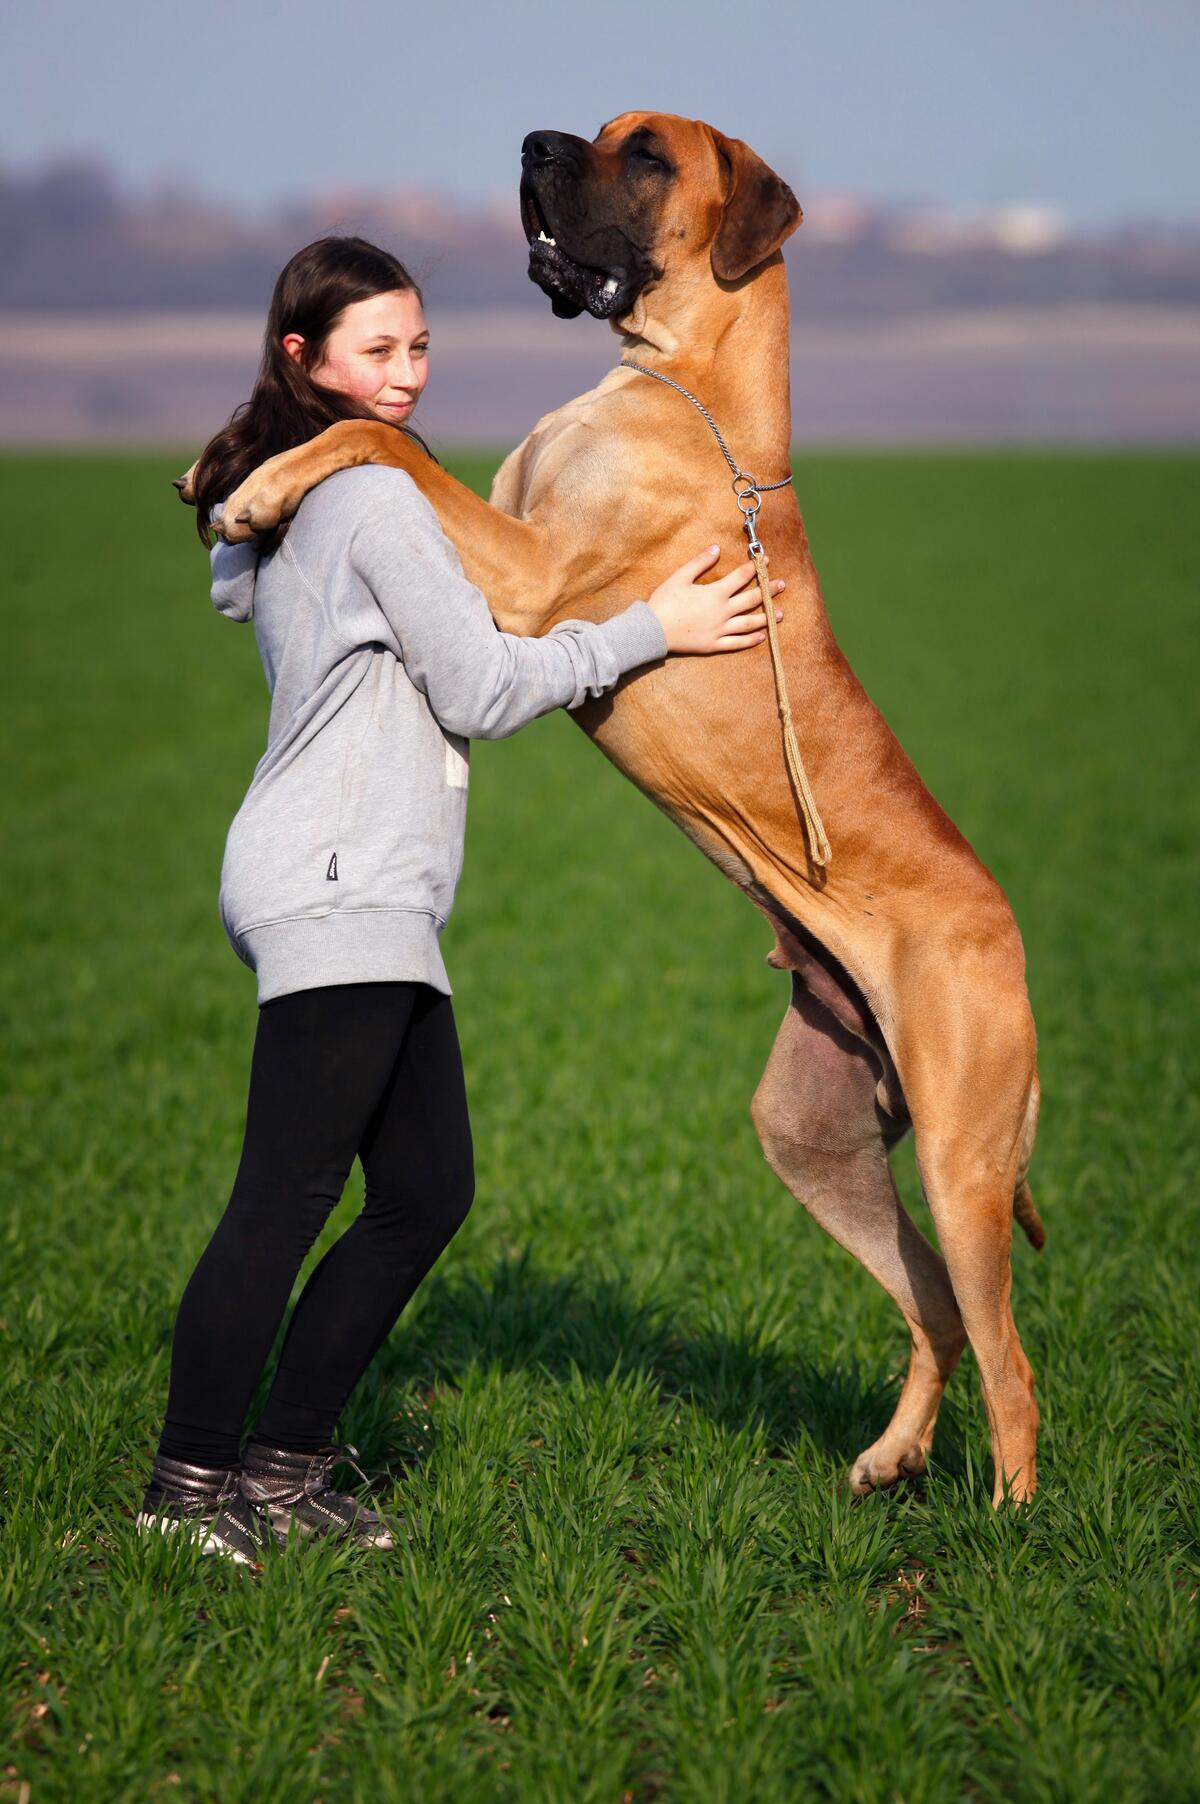 A girl and a big dog standing in an embrace